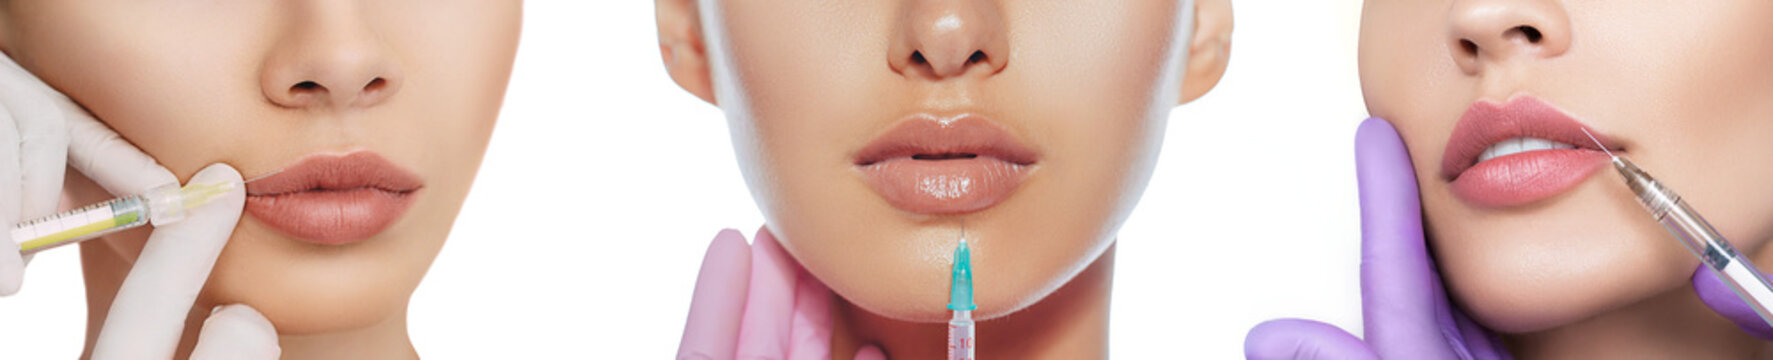 Set Of Sensual Female Lips, Procedure Lip Augmentation. Syringe Near Womans Mouth, Injections For Increase Lips Shape